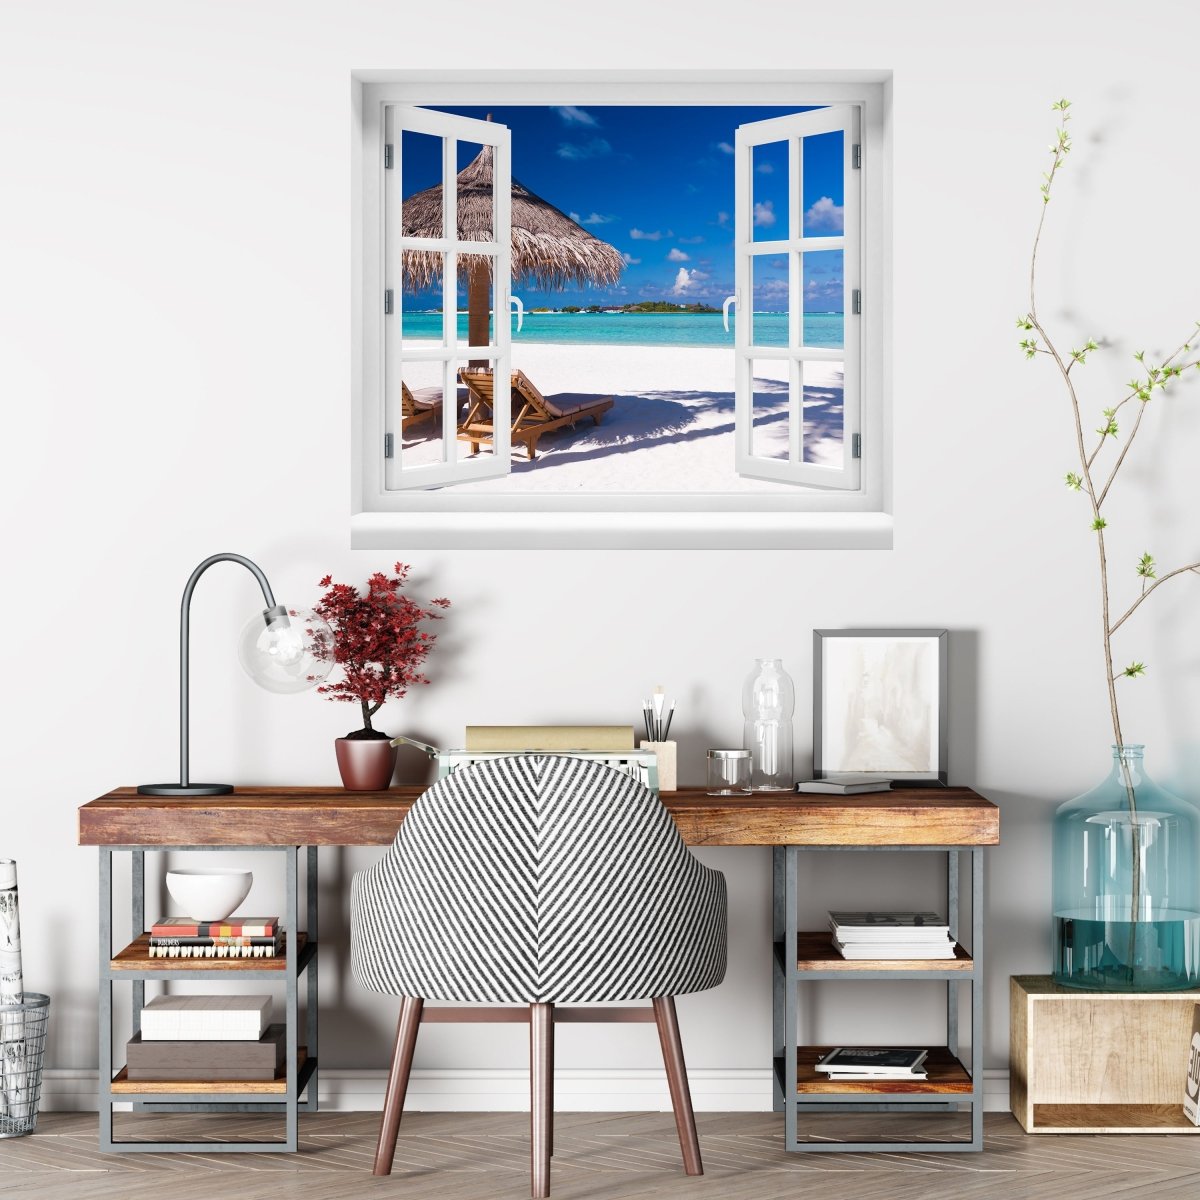 3D wall sticker relaxing on the beach - Wall Decal M0450